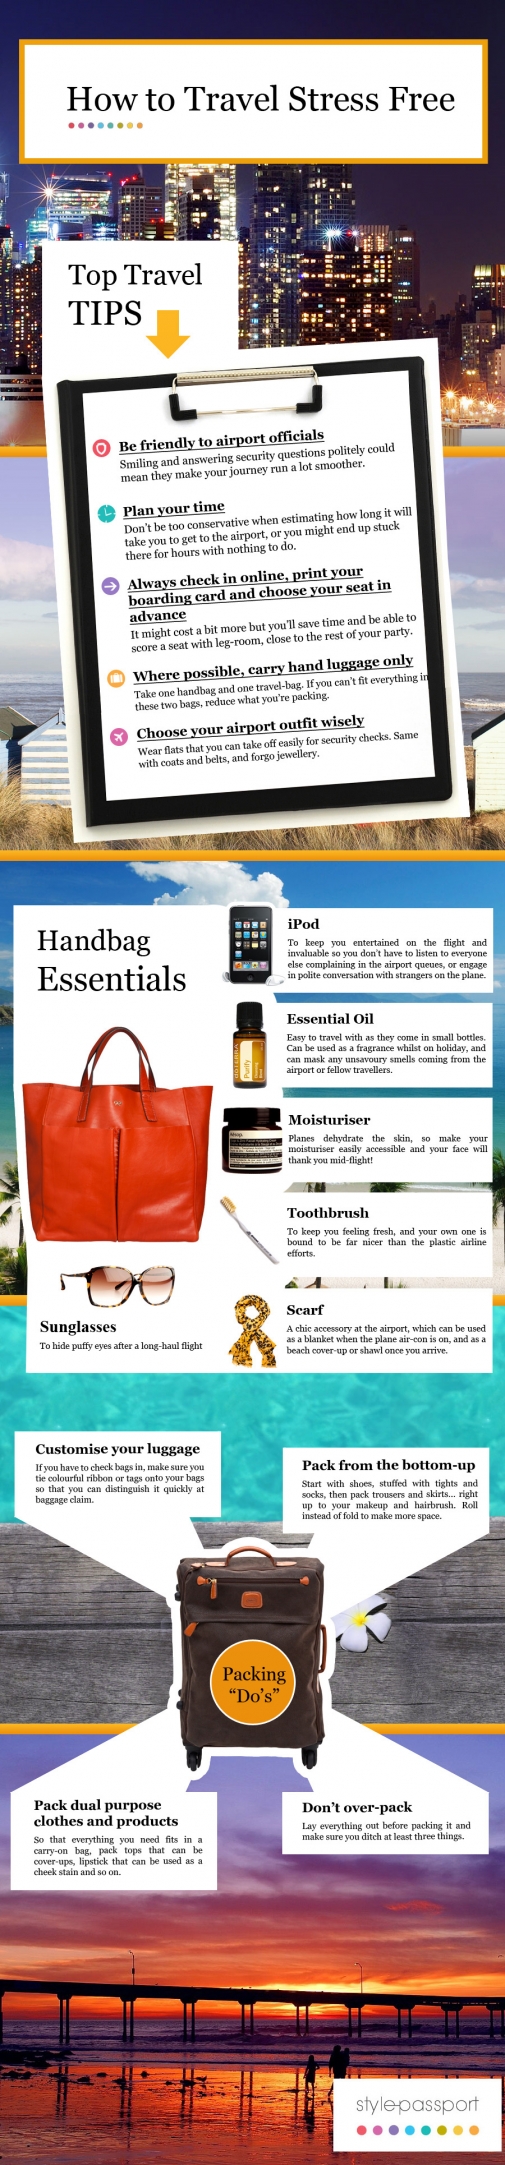 HowtoTravelStressFreeInfographic_4ea0847a5953f.jpg